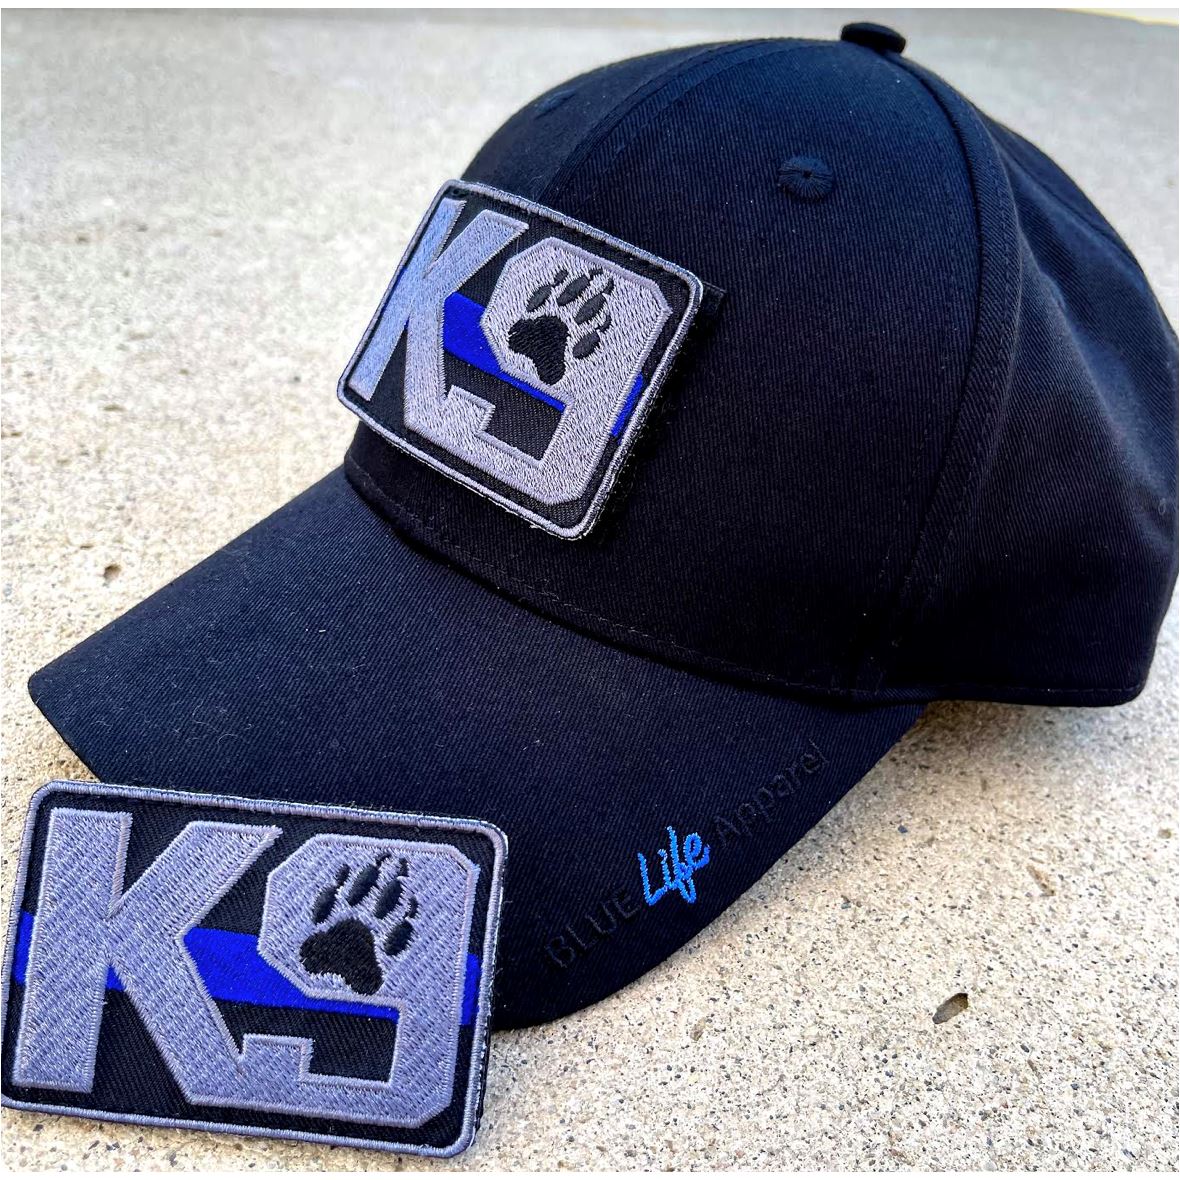 Black Operator's Hat with Thin Blue Line Patch Hats Blue Life Apparel Hat with K9 Patch 